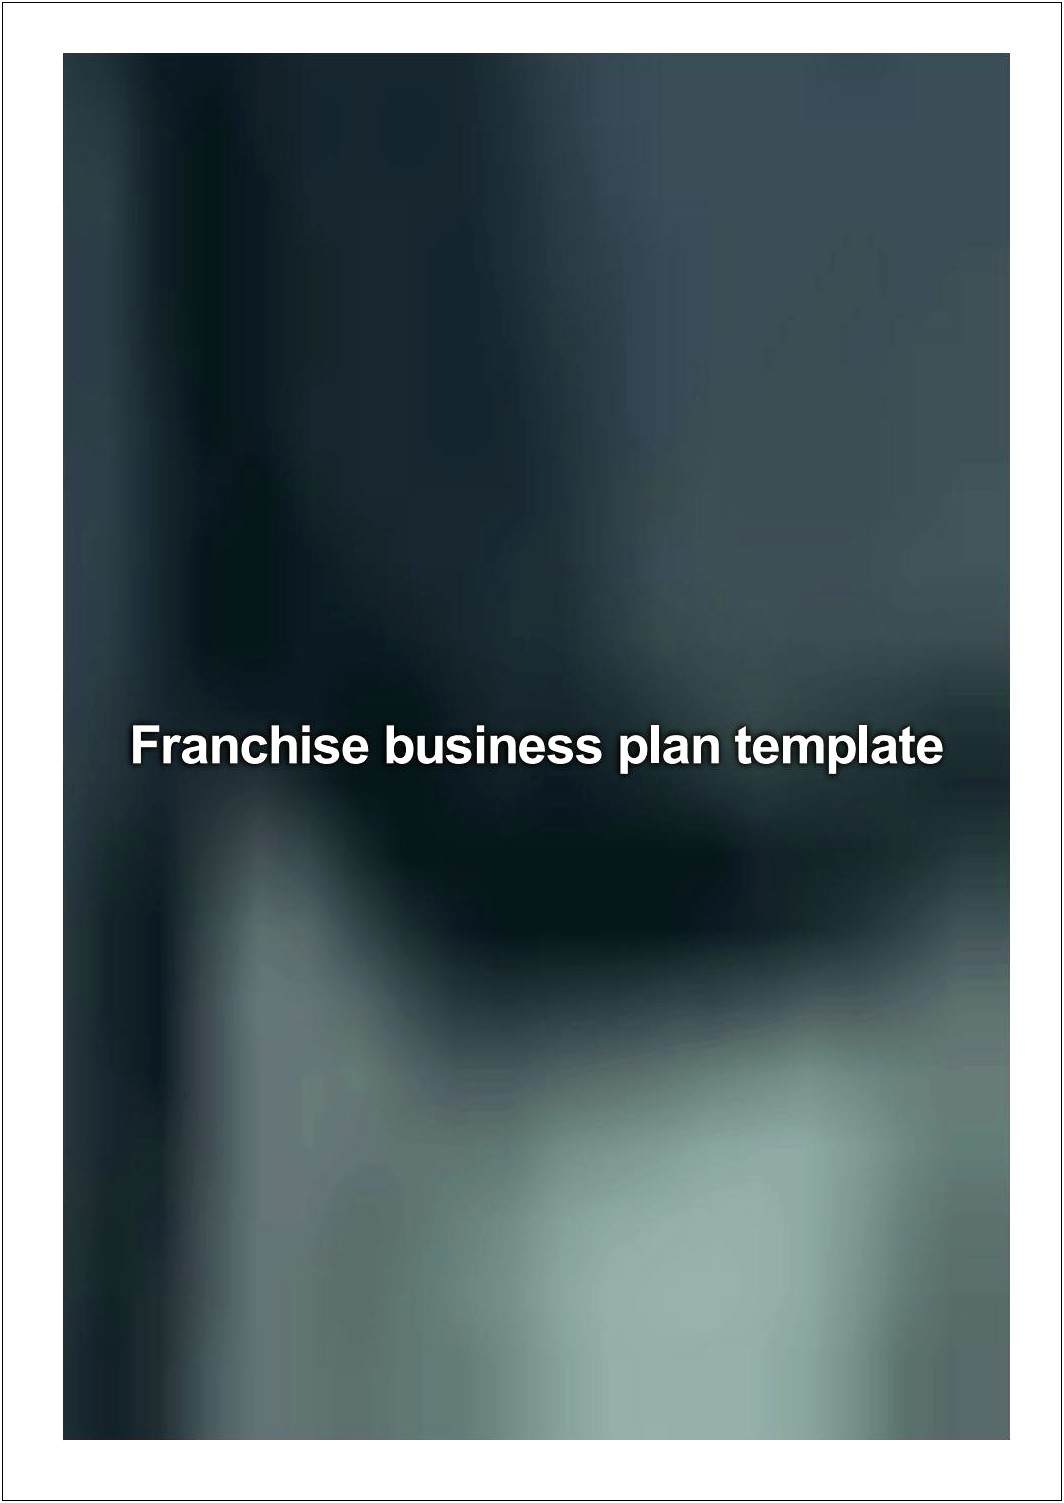 Free Business Plan Template For Franchise